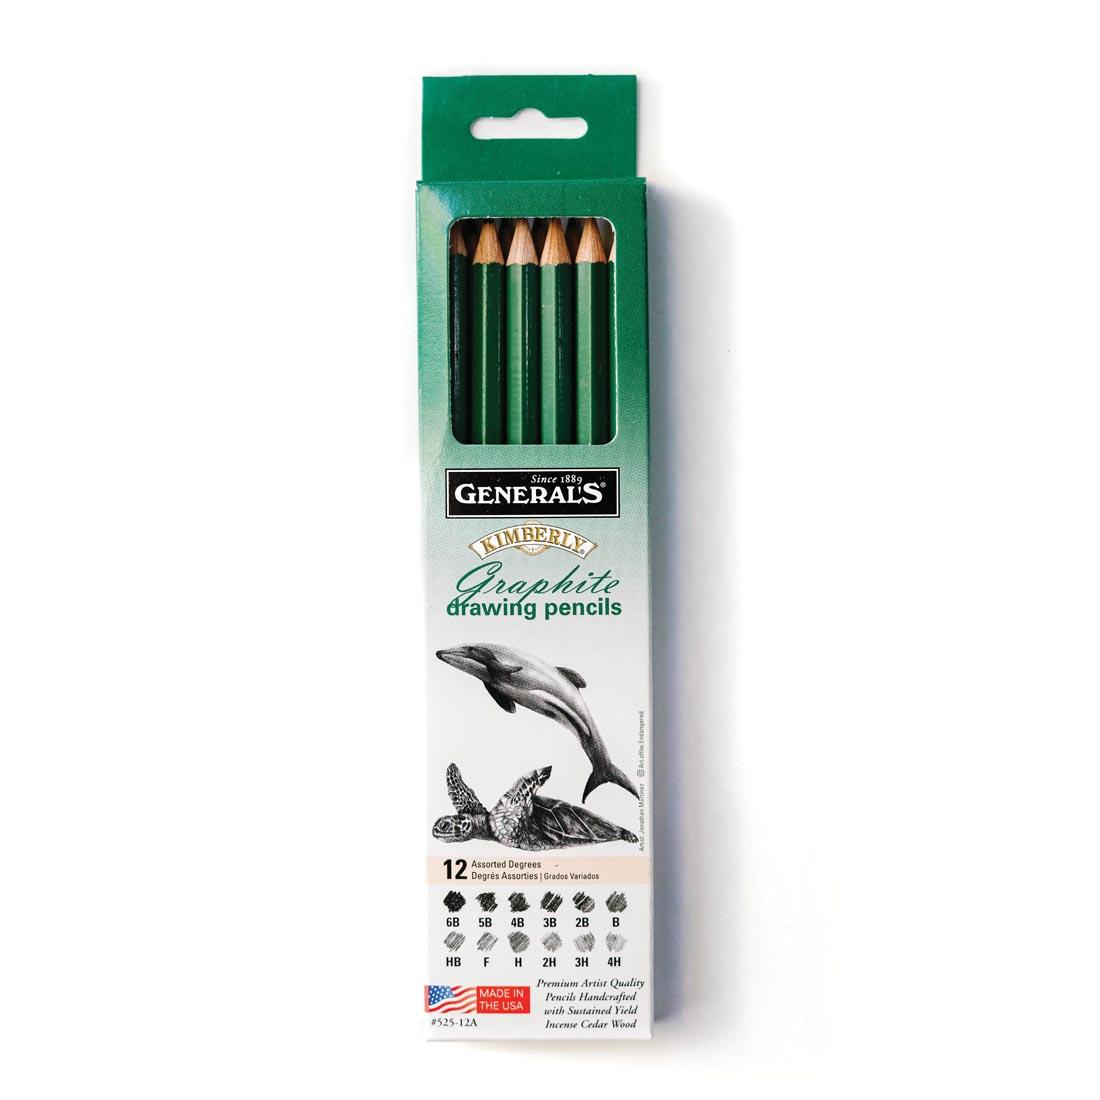 General's Kimberly Graphite Drawing Pencil Set in box